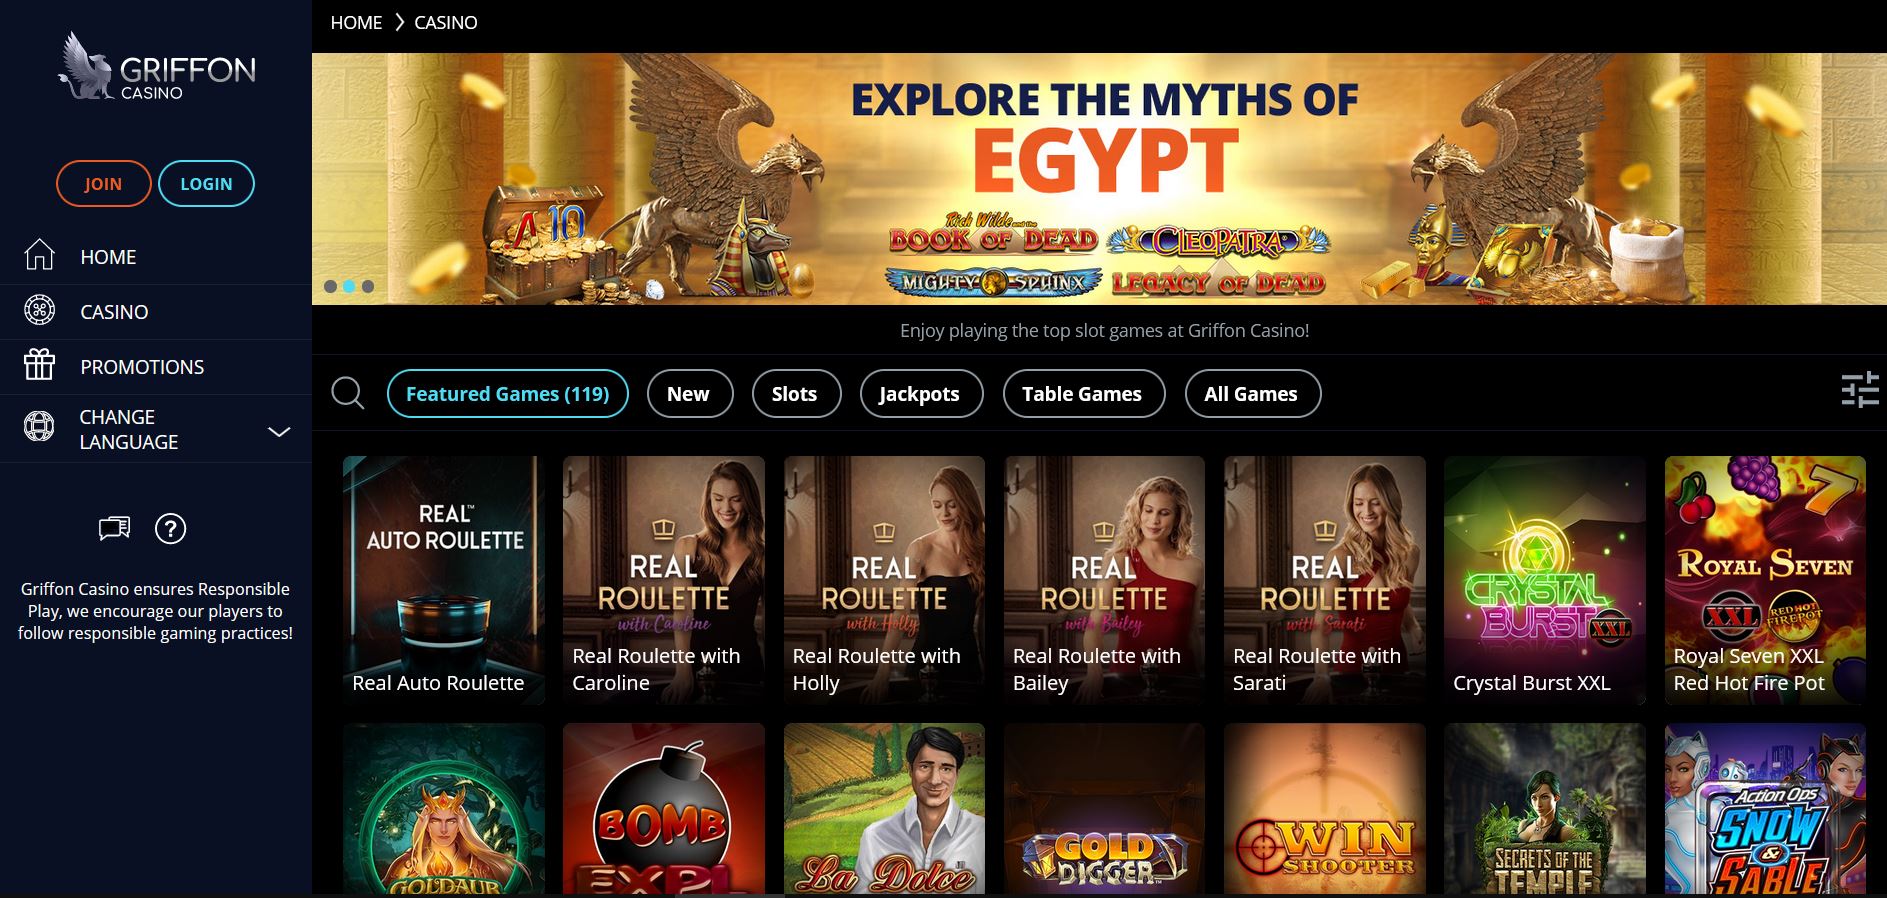 Griffon Casino is the new all mobile product casino from Karamba